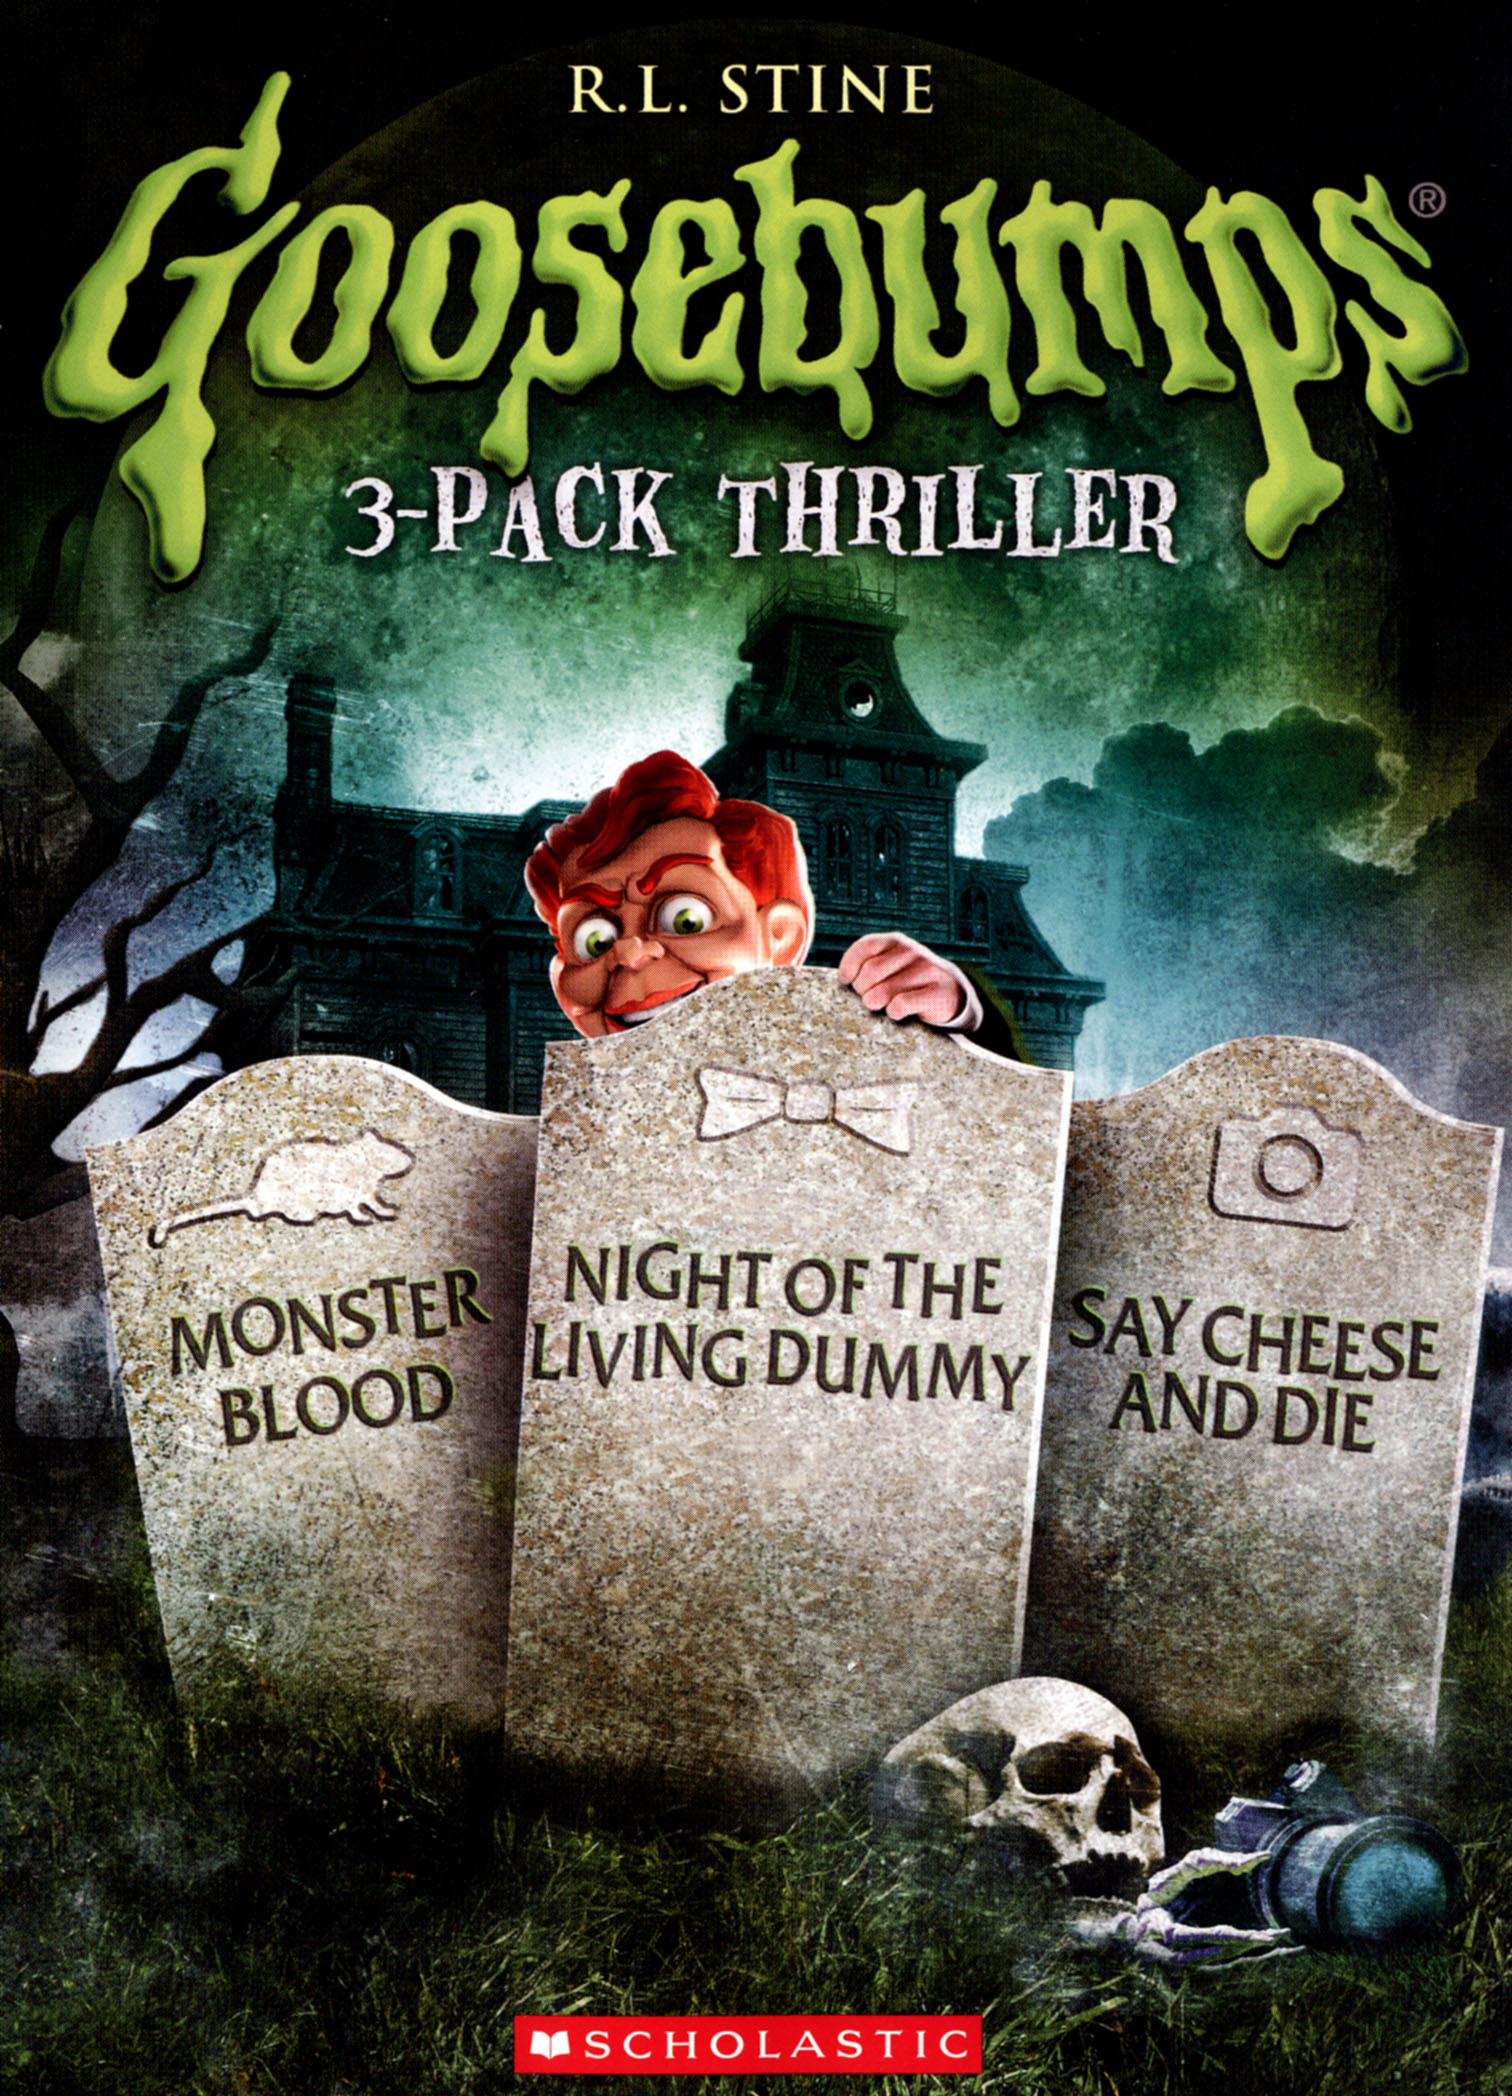 Goosebumps Monster Blood/Night of the Living Dummy/Say Cheese and Die